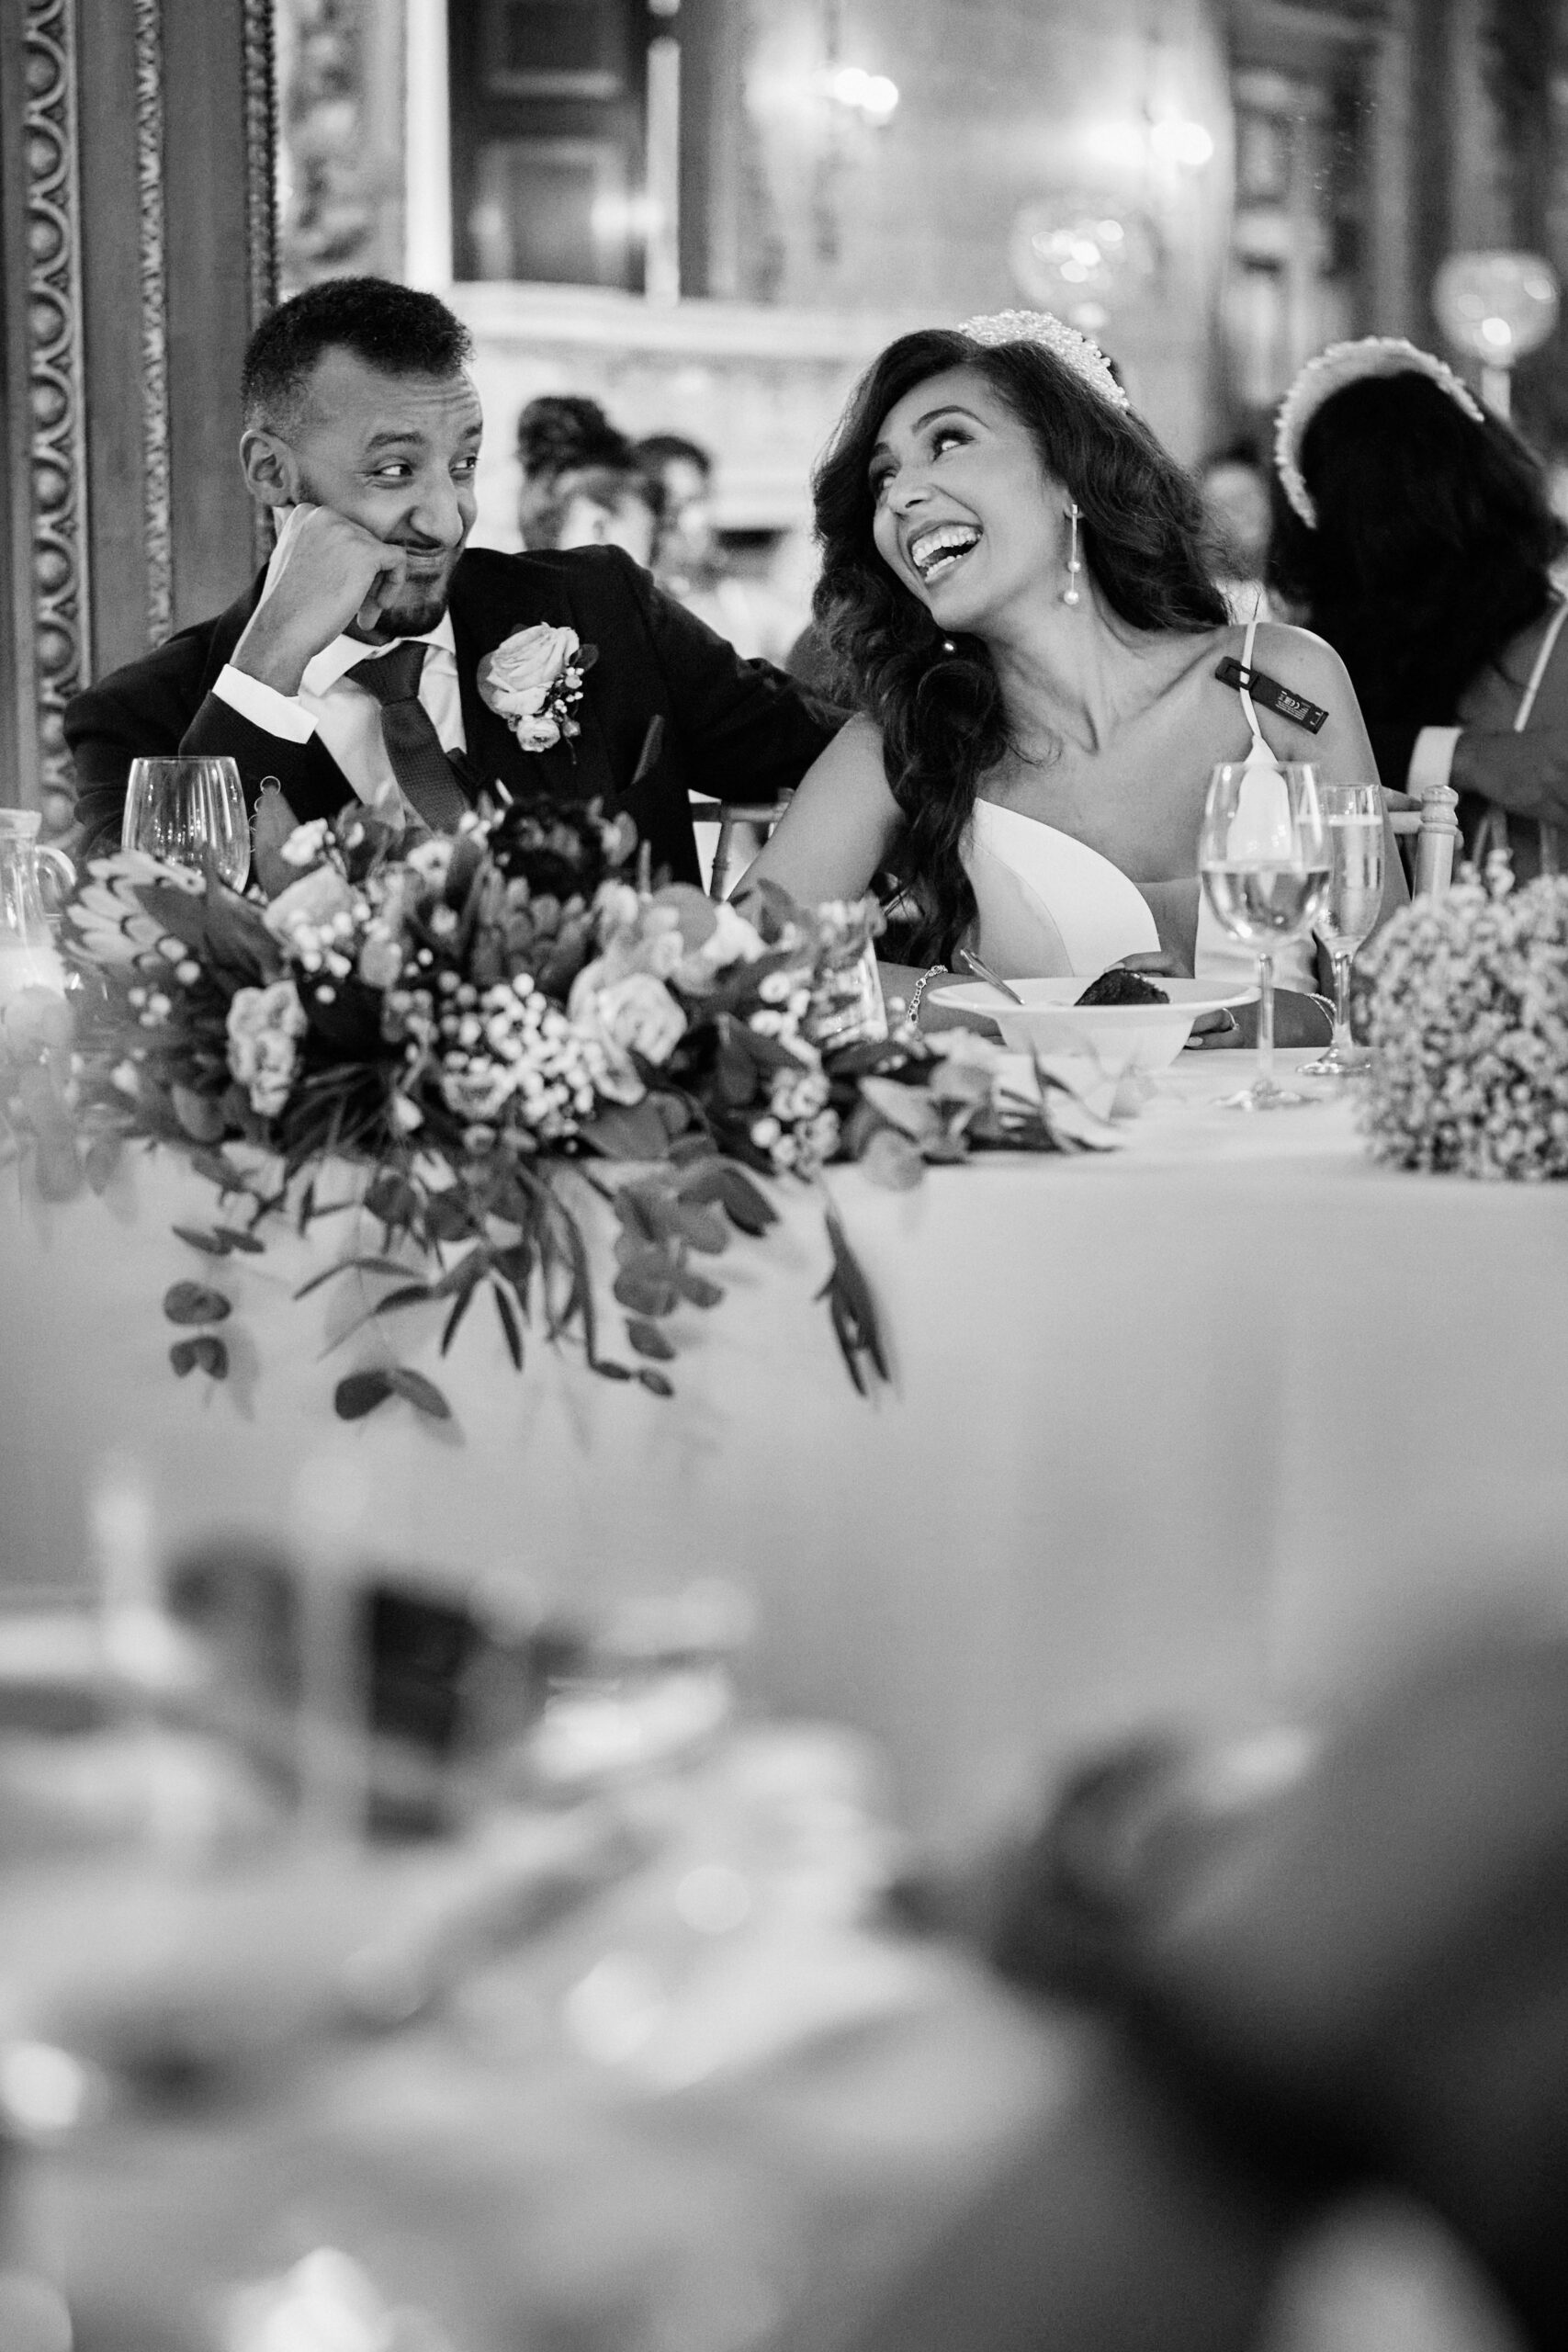 A black and white picture of a couple in their wedding attire sitting at a table.